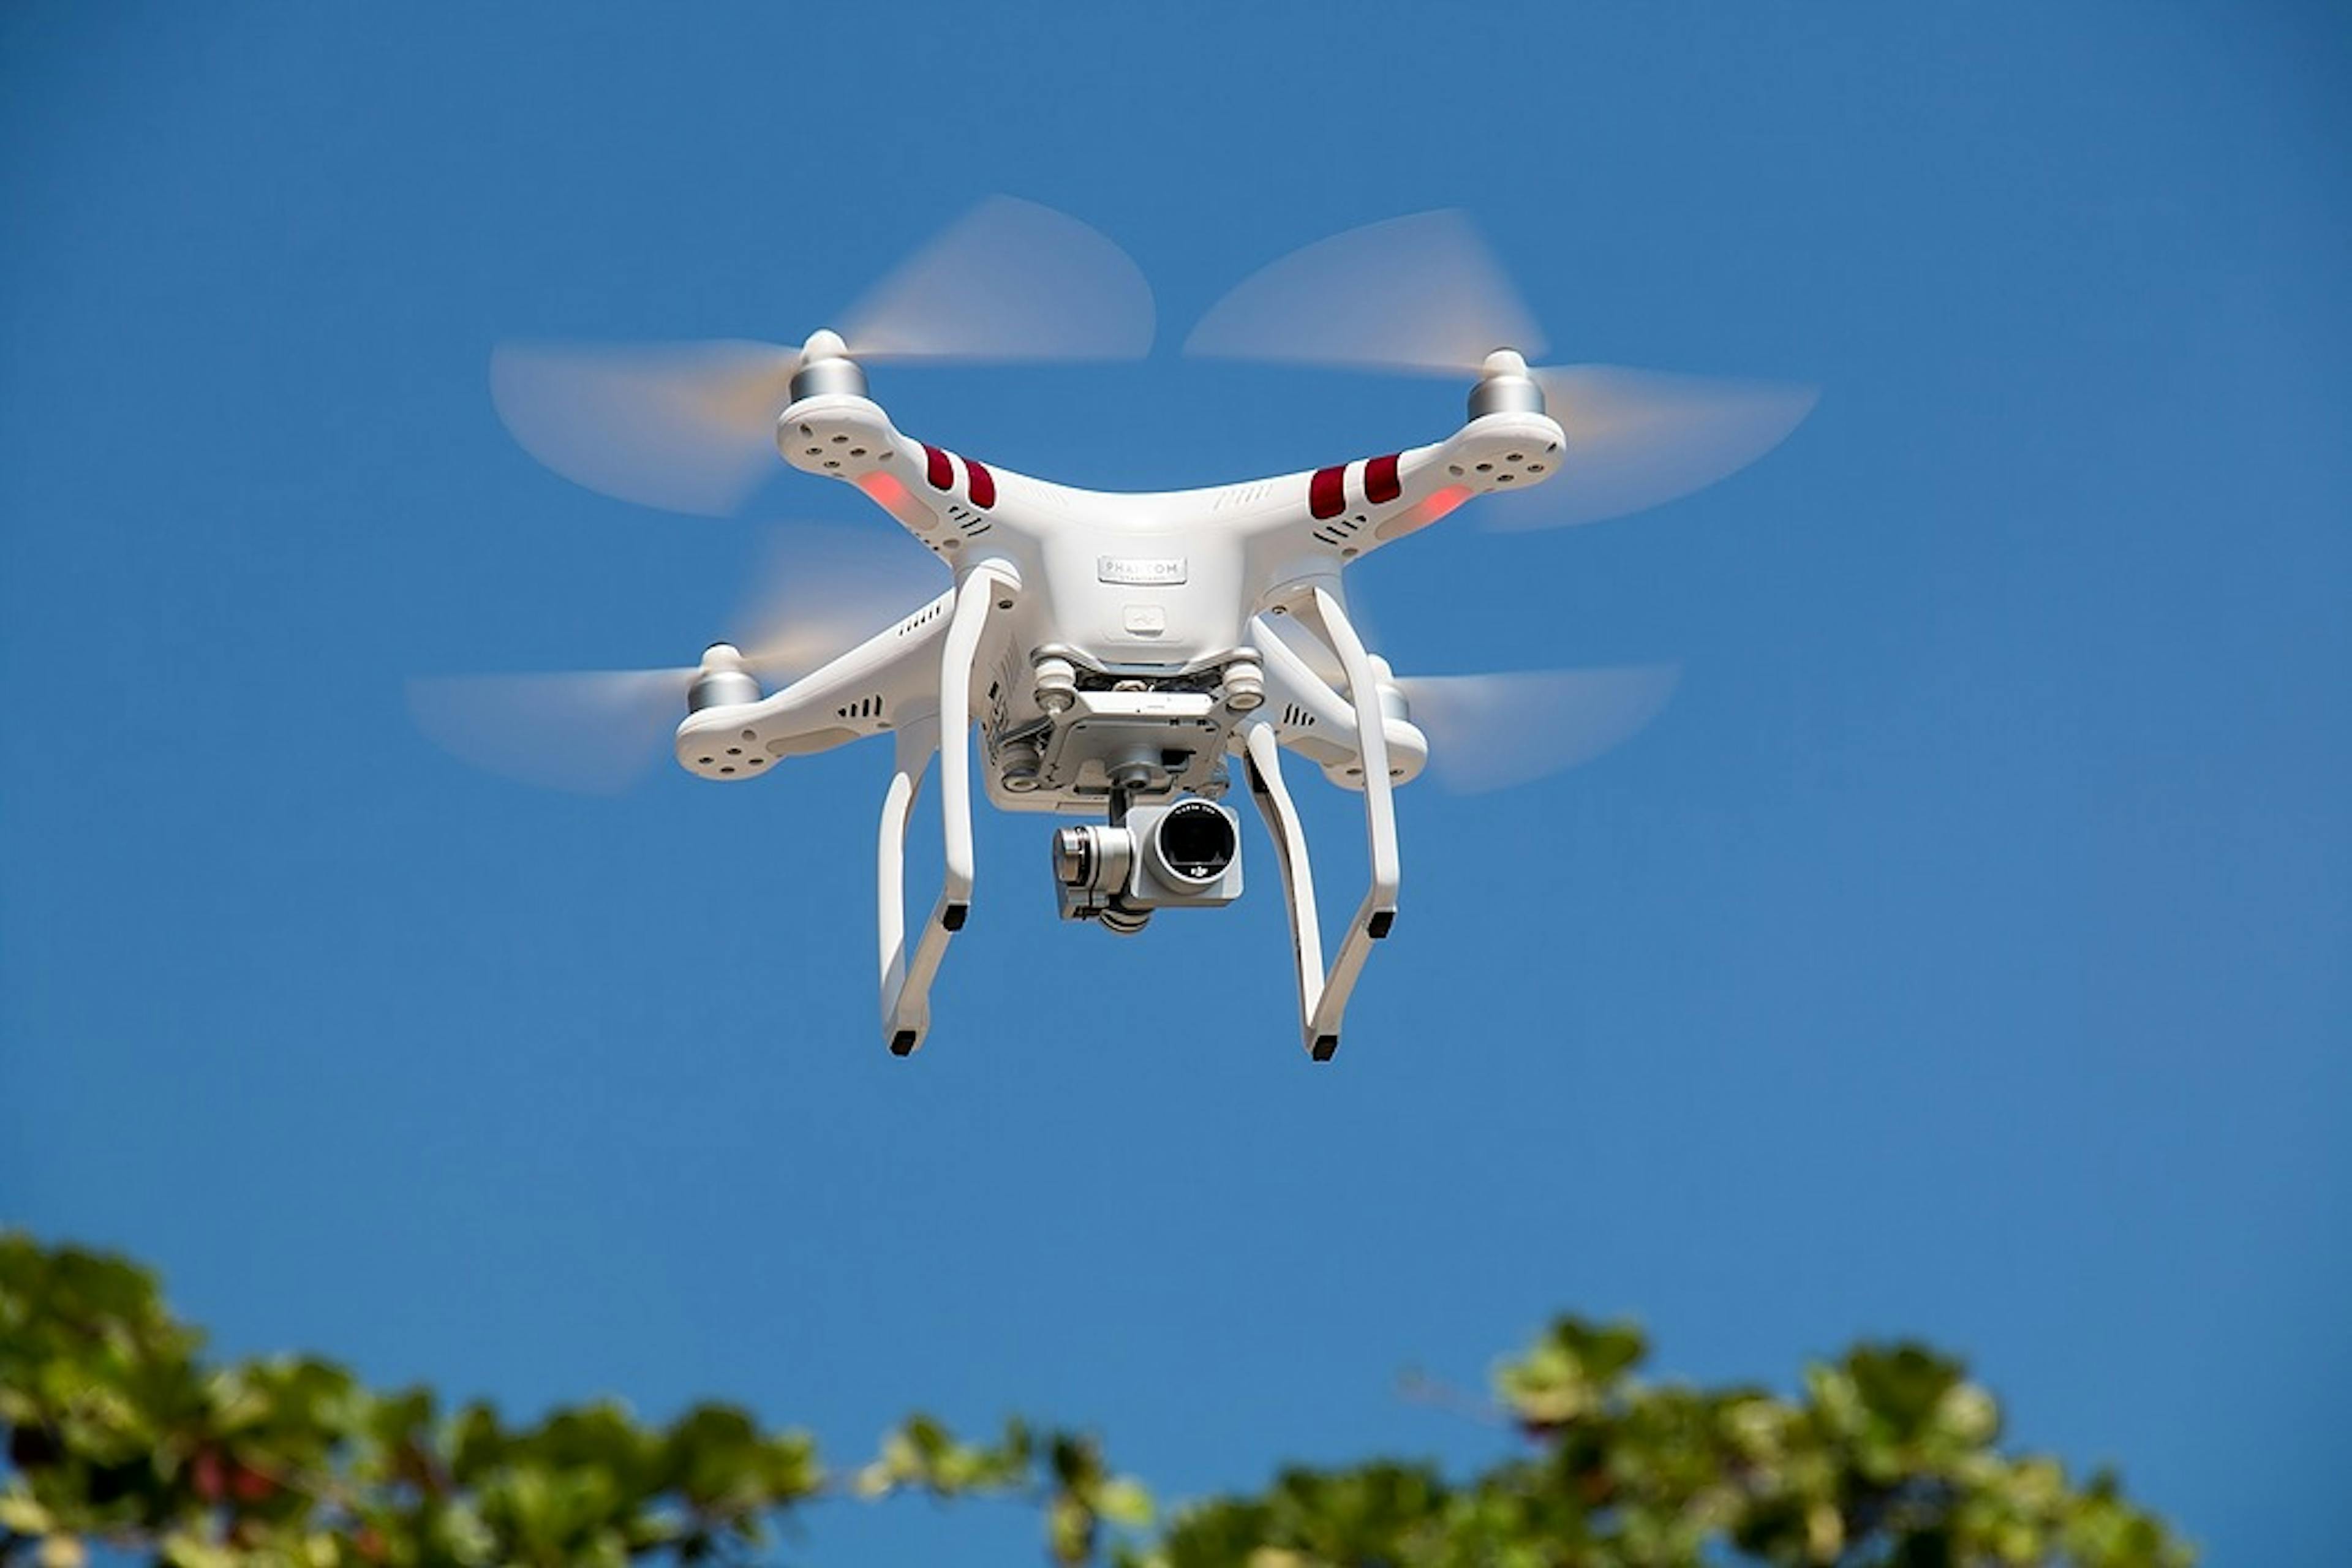 featured image - Drones: The Good, The Bad,  
The Ugly